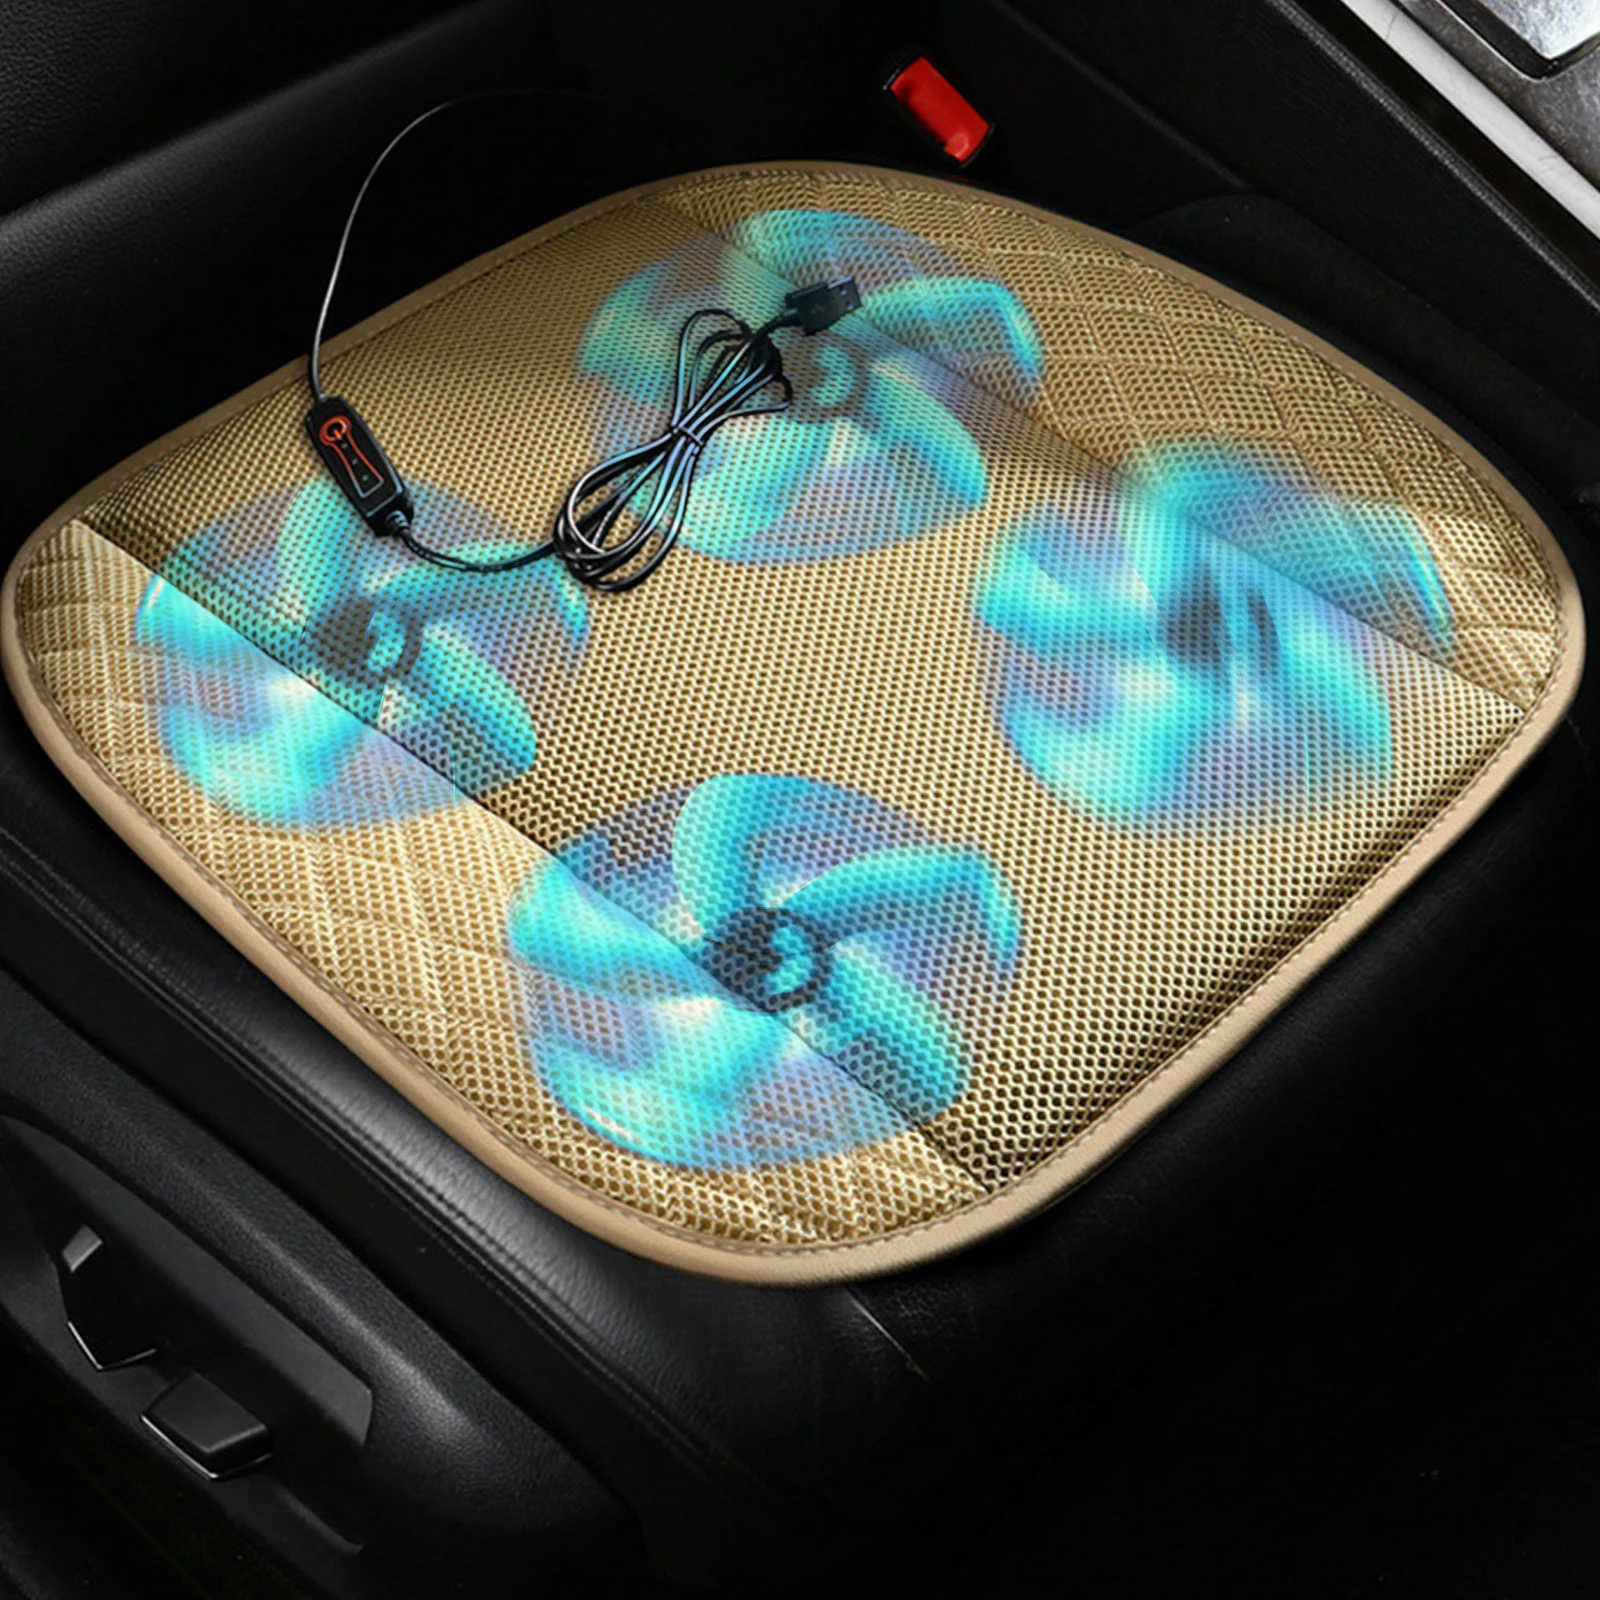 12V Cooling Car Seat Cushion Cover With Air Ventilated Fan Conditioned Cooler Pad With 5 Built-in Fan USB port-powered Fan Seat